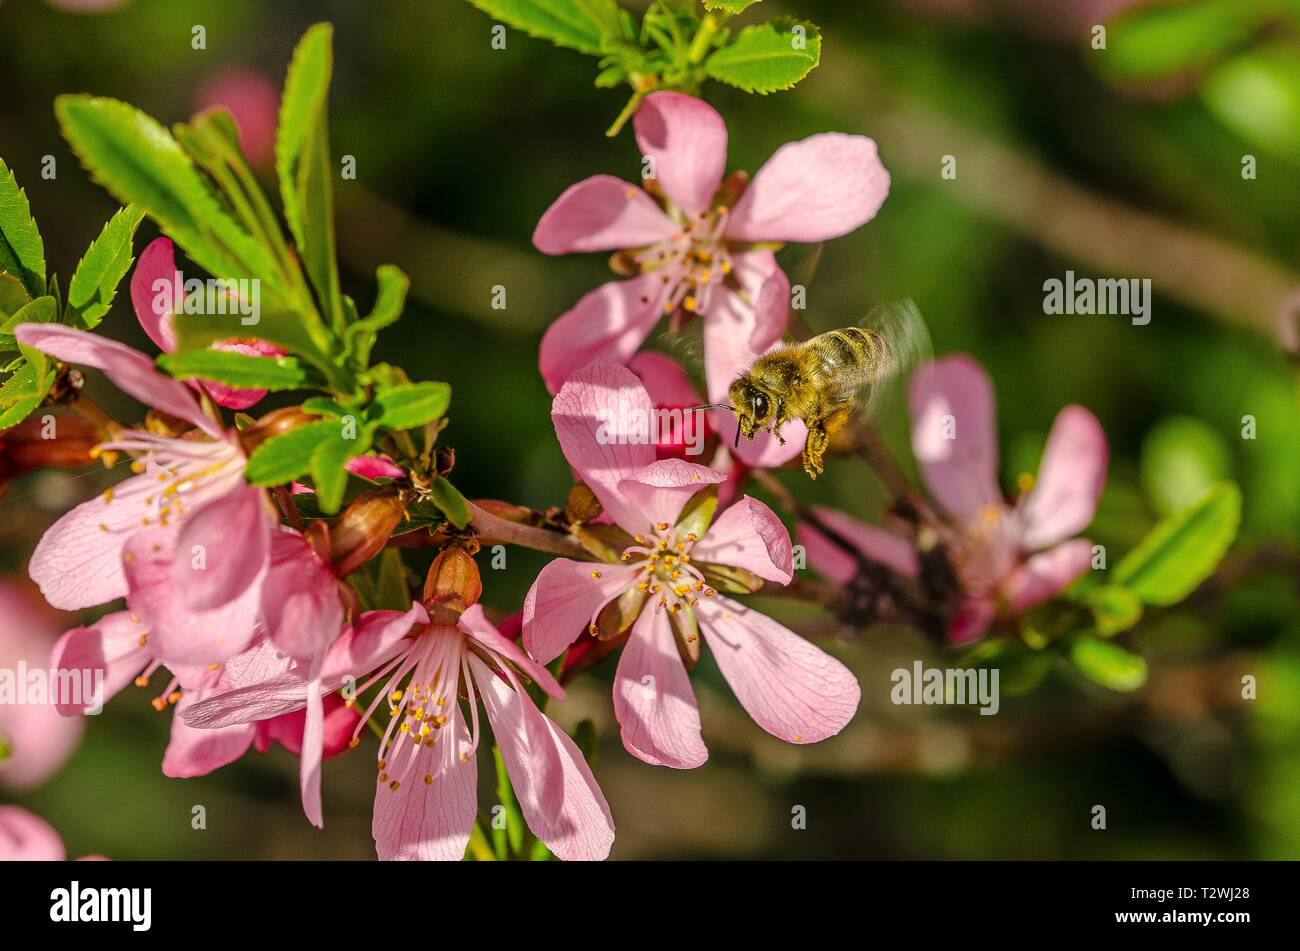 honey bee collecting pollen at a shrub with pink blossoms Stock Photo